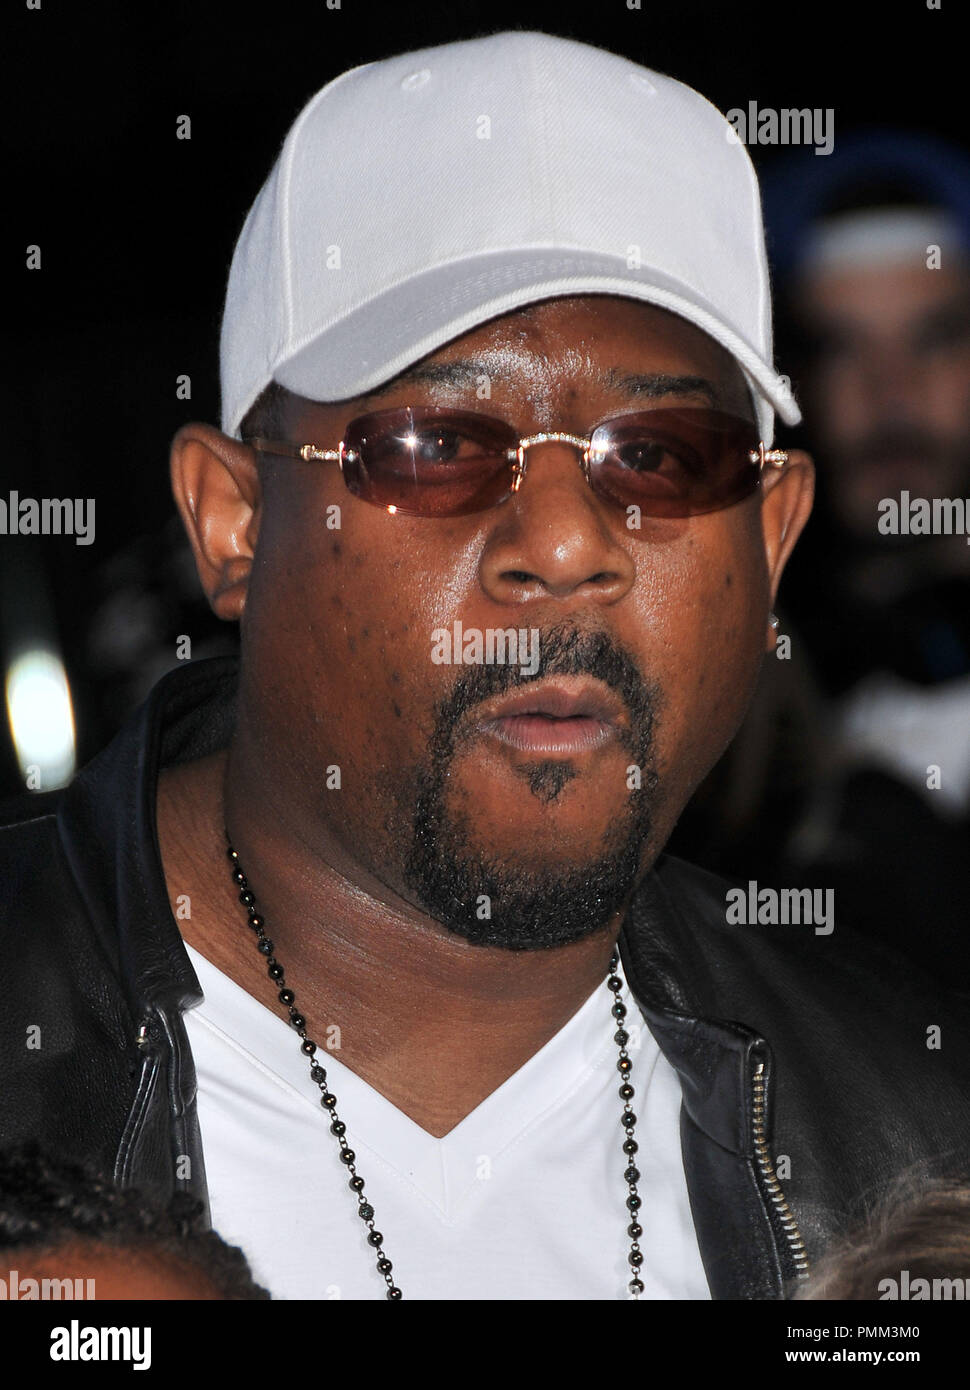 Martin Lawrence at the Los Angeles Premiere of 'Big Mommas Like Father, Like Son' held at the Arclight Cinerama Dome in Hollywood, CA. The event took place on Thursday, February 10, 2011. Photo by PRPP Pacific Rim Photo Press / PictureLux Stock Photo